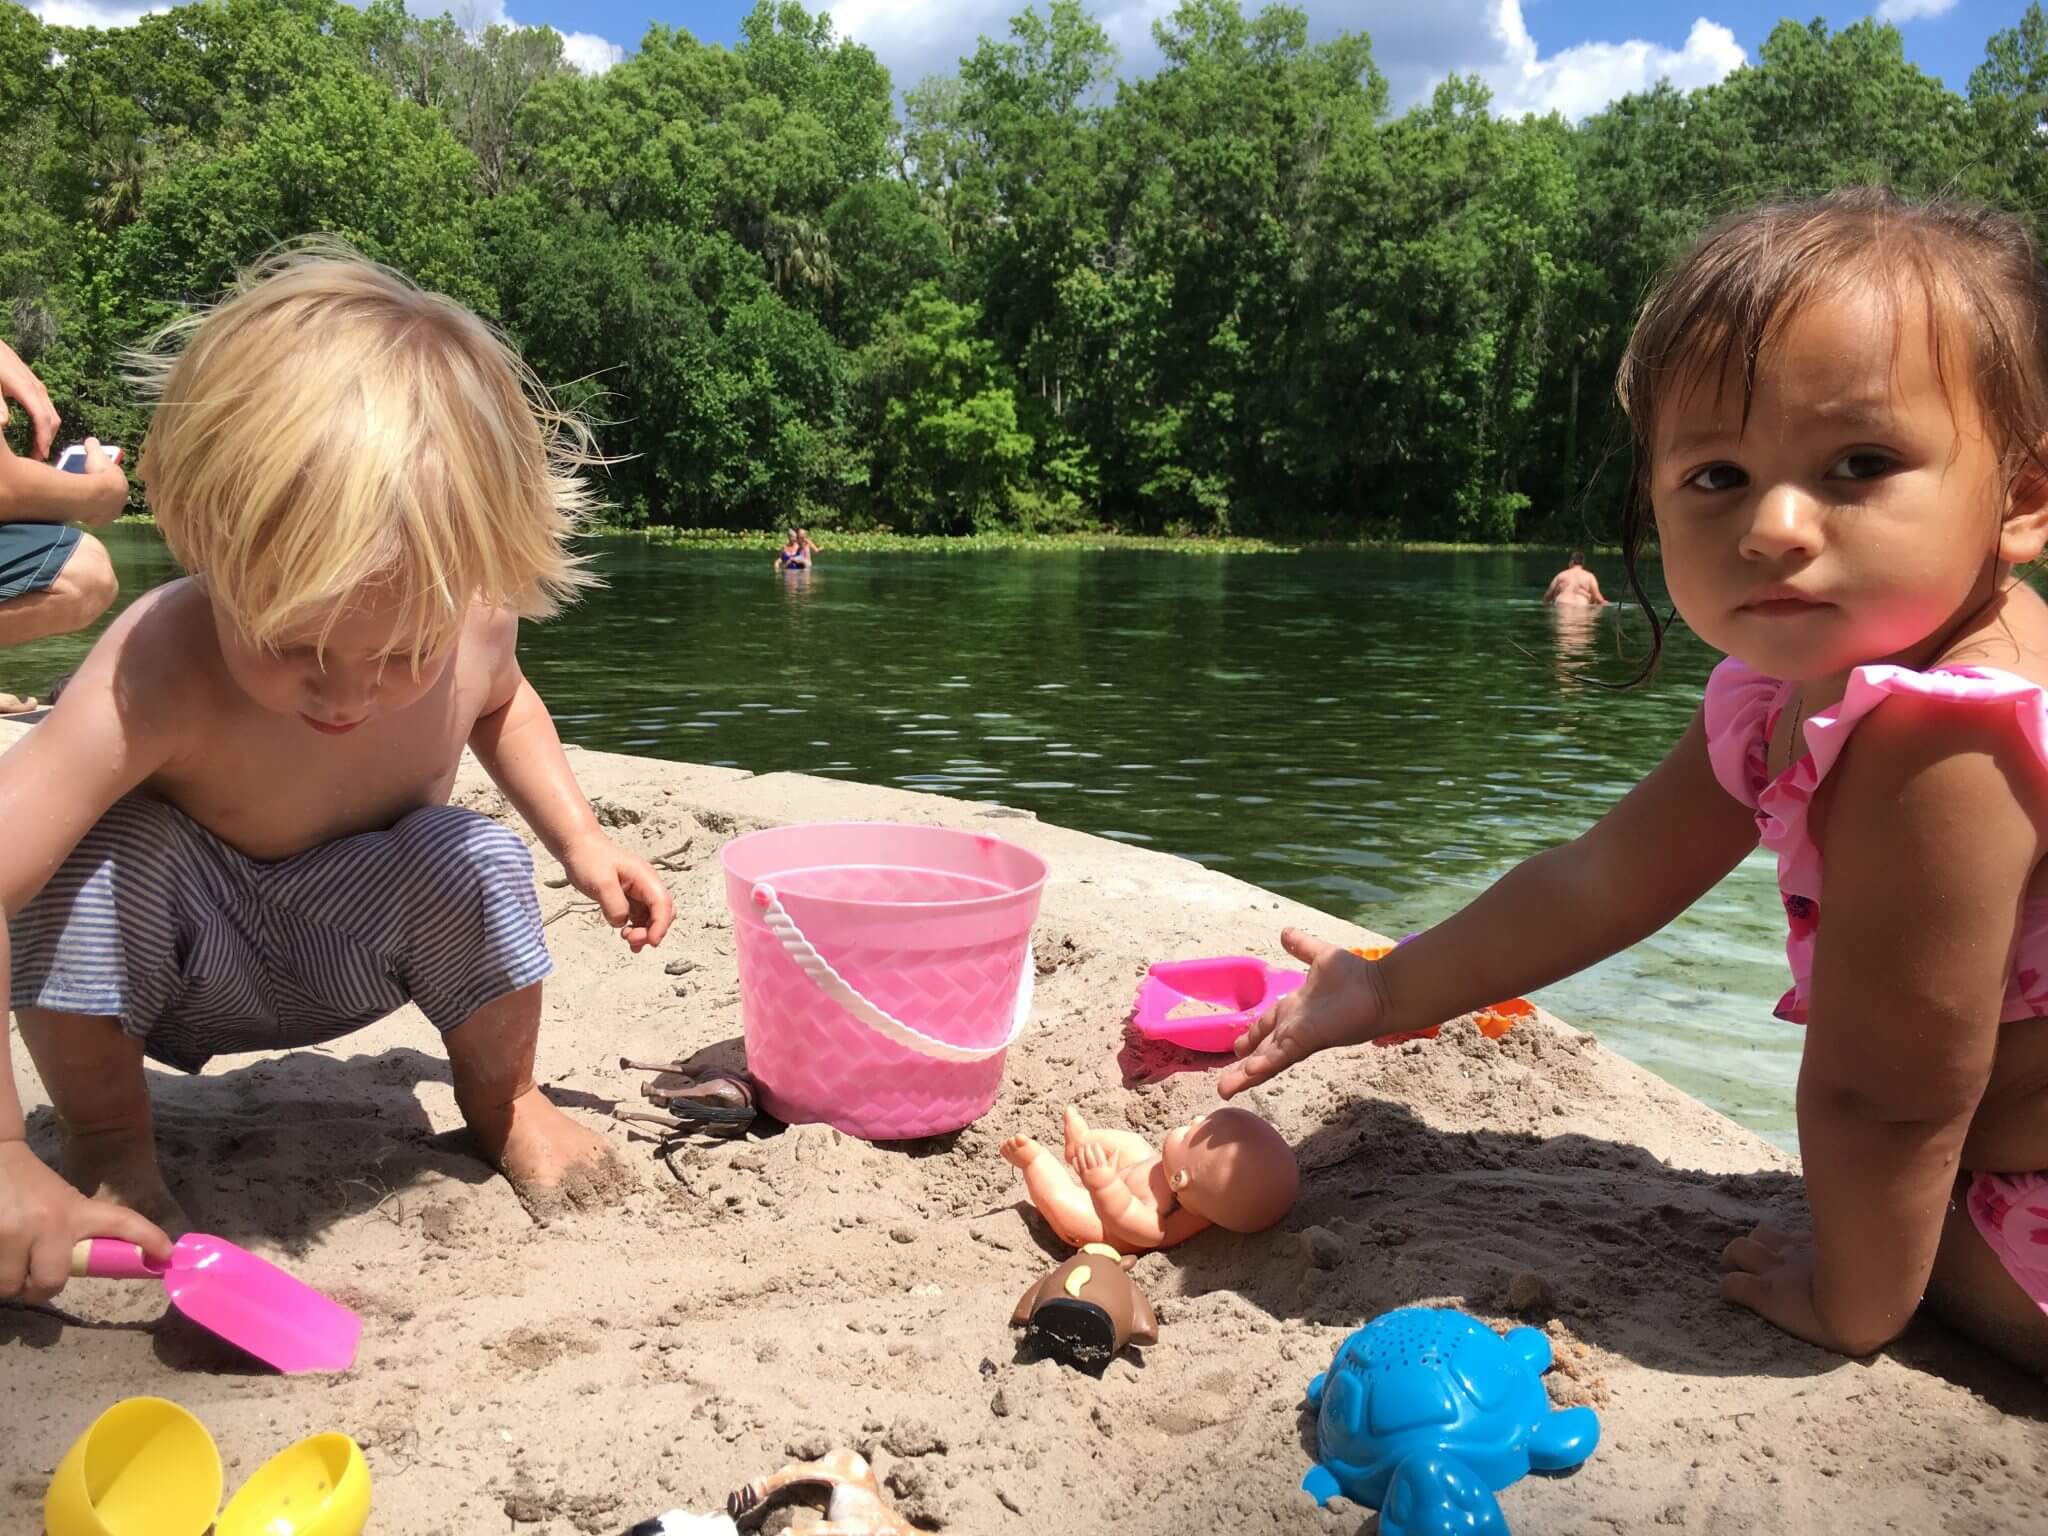 Playing in the sand at Alexander Springs in Ocala National Forest in Norther Florida. Tips for Tent Camping with a Toddler and more Family Travel Tips at www.HuntingforRubies.com